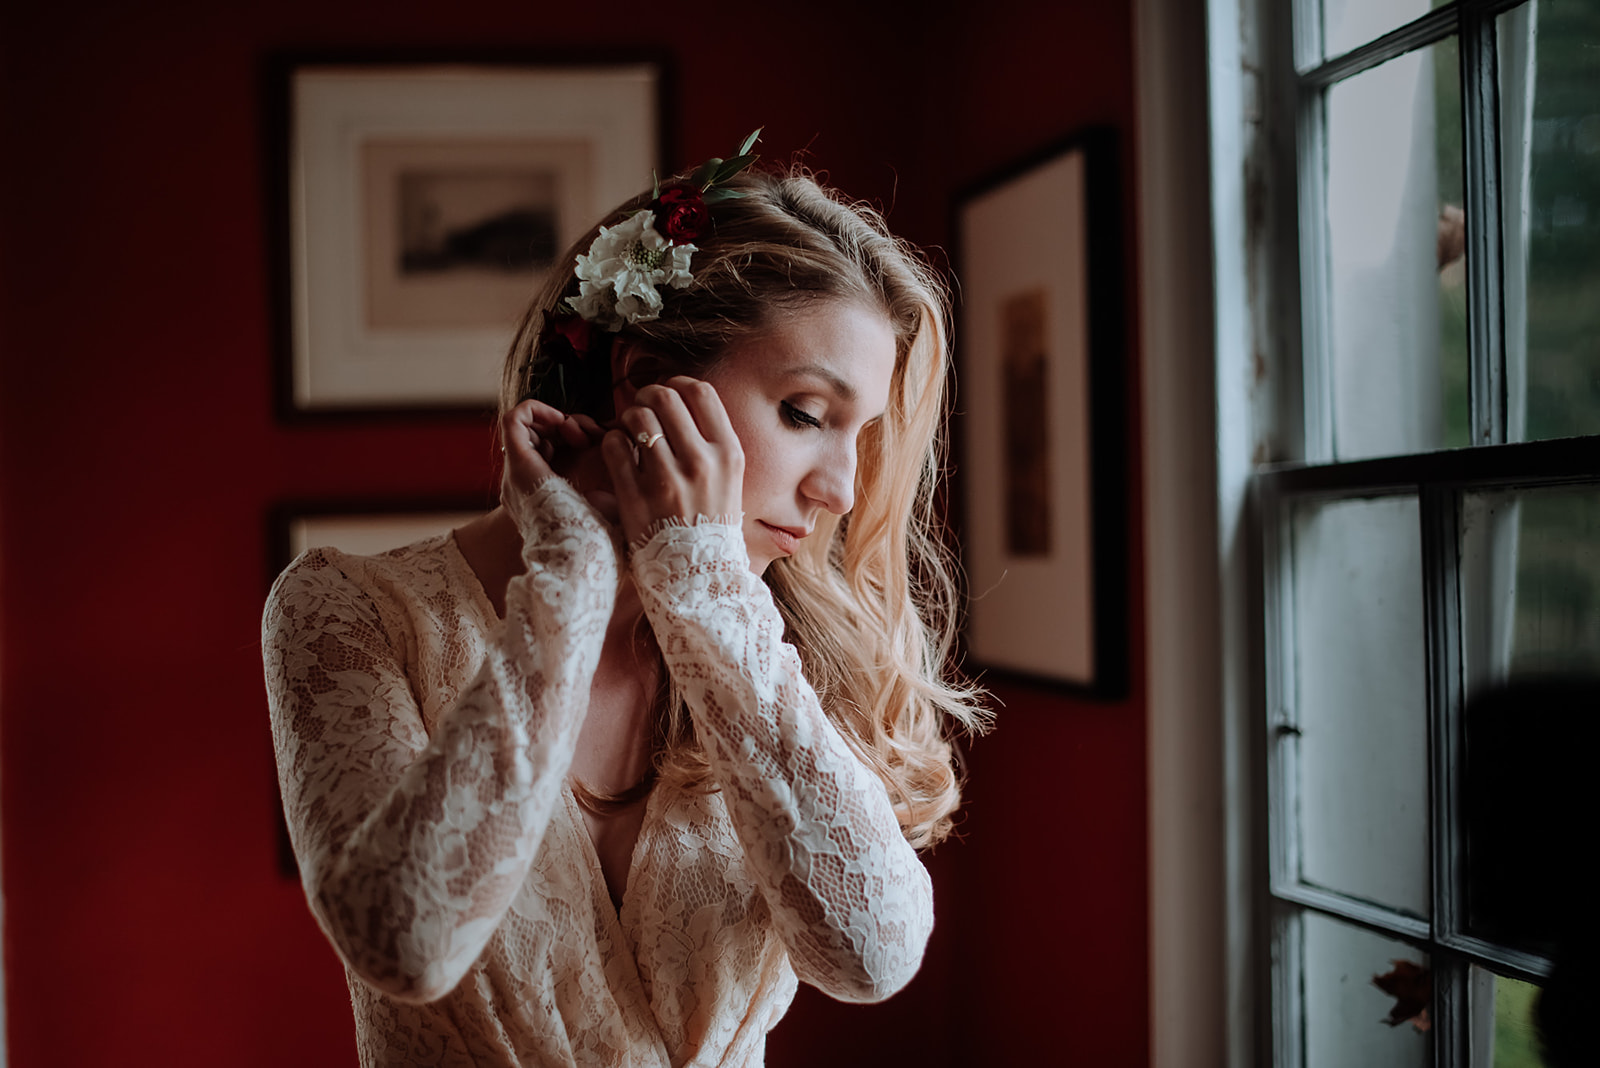 Natalie's long sleeved vintage lace wedding dress fits her perfectly as she puts her earrings on.